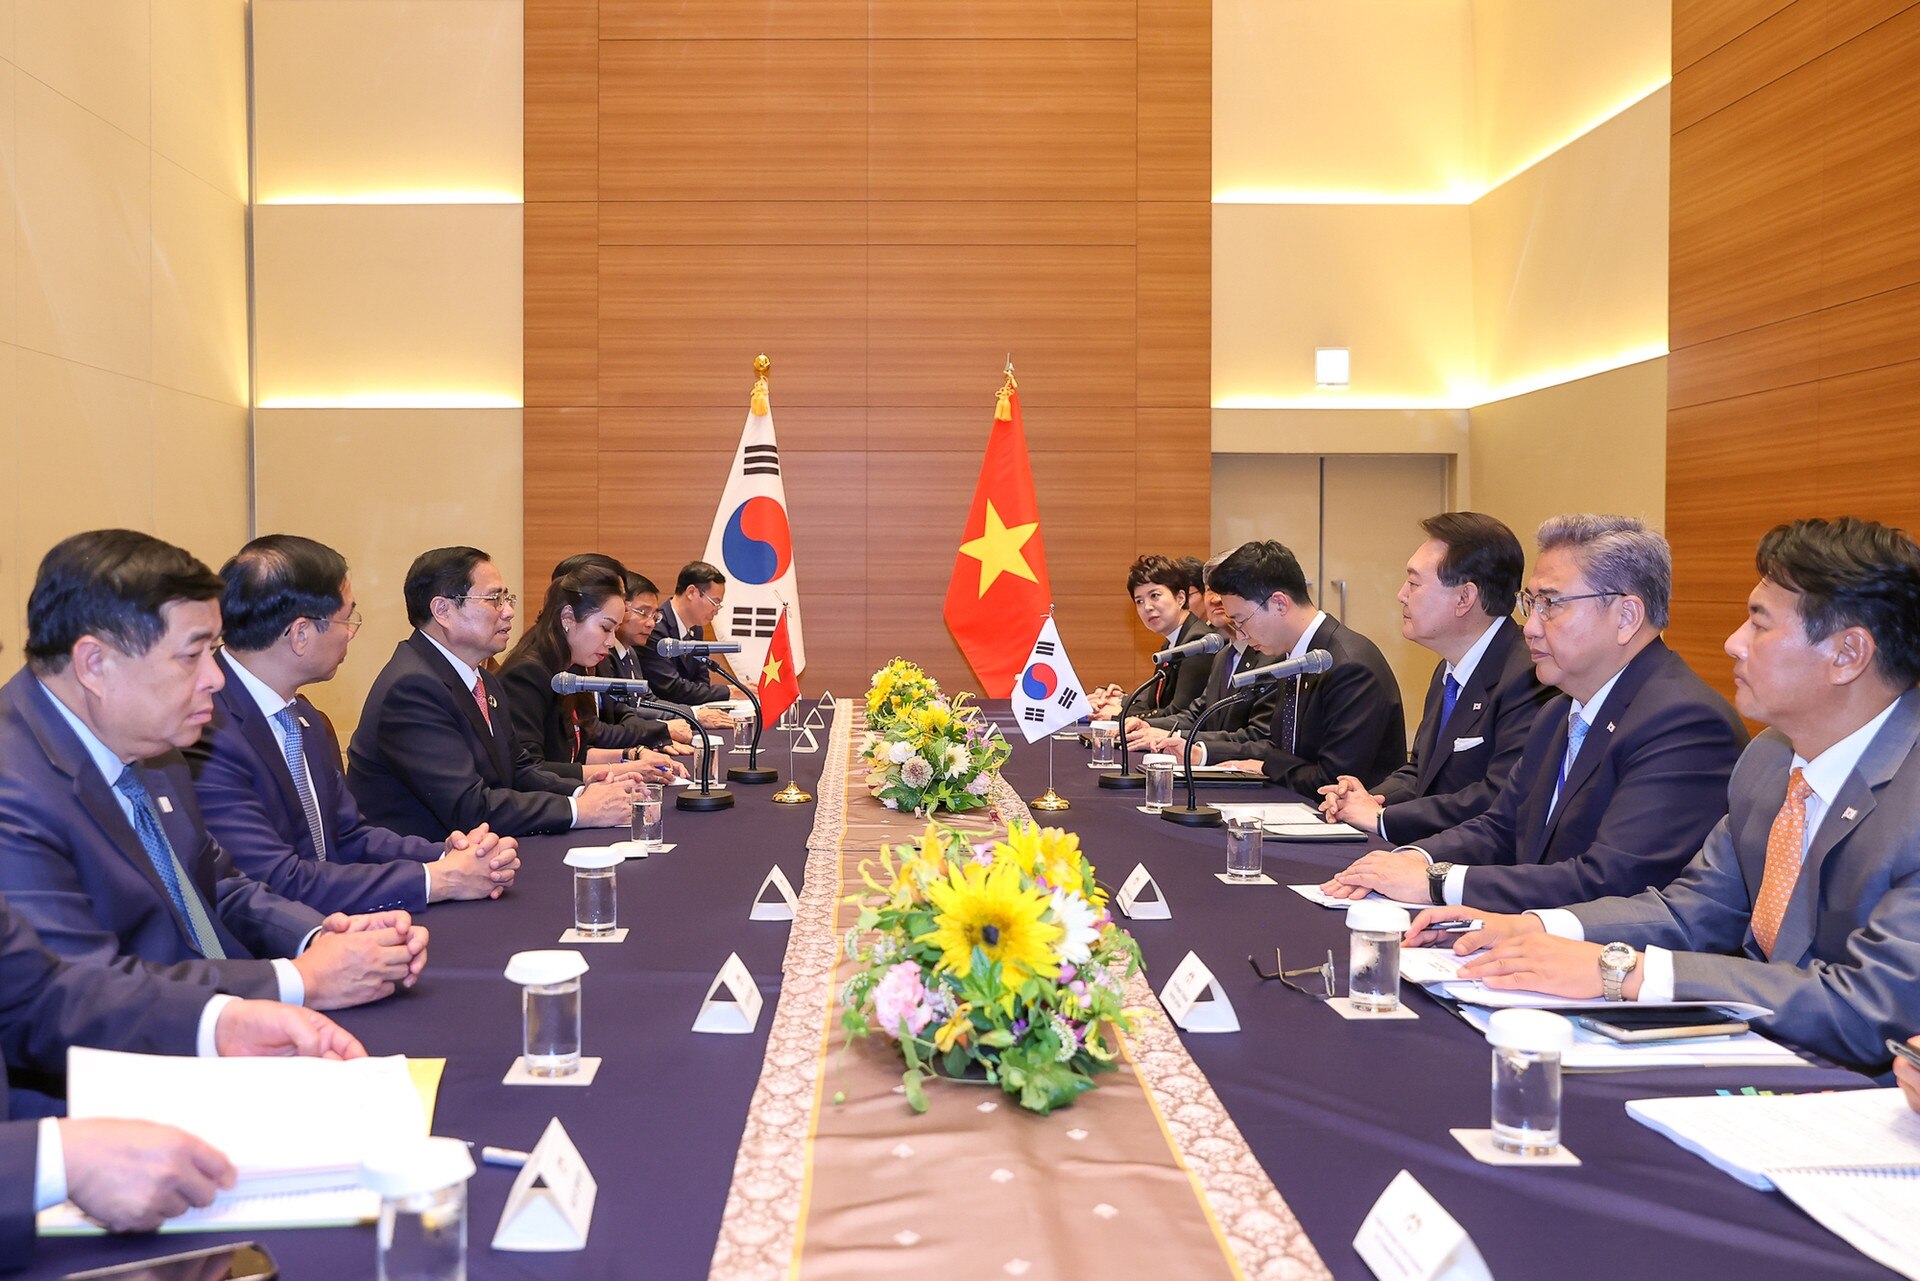 Prime Minister Pham Minh Chinh meets with the President of the Republic of Korea on the occasion of the G7 Open Summit - Photo 2.